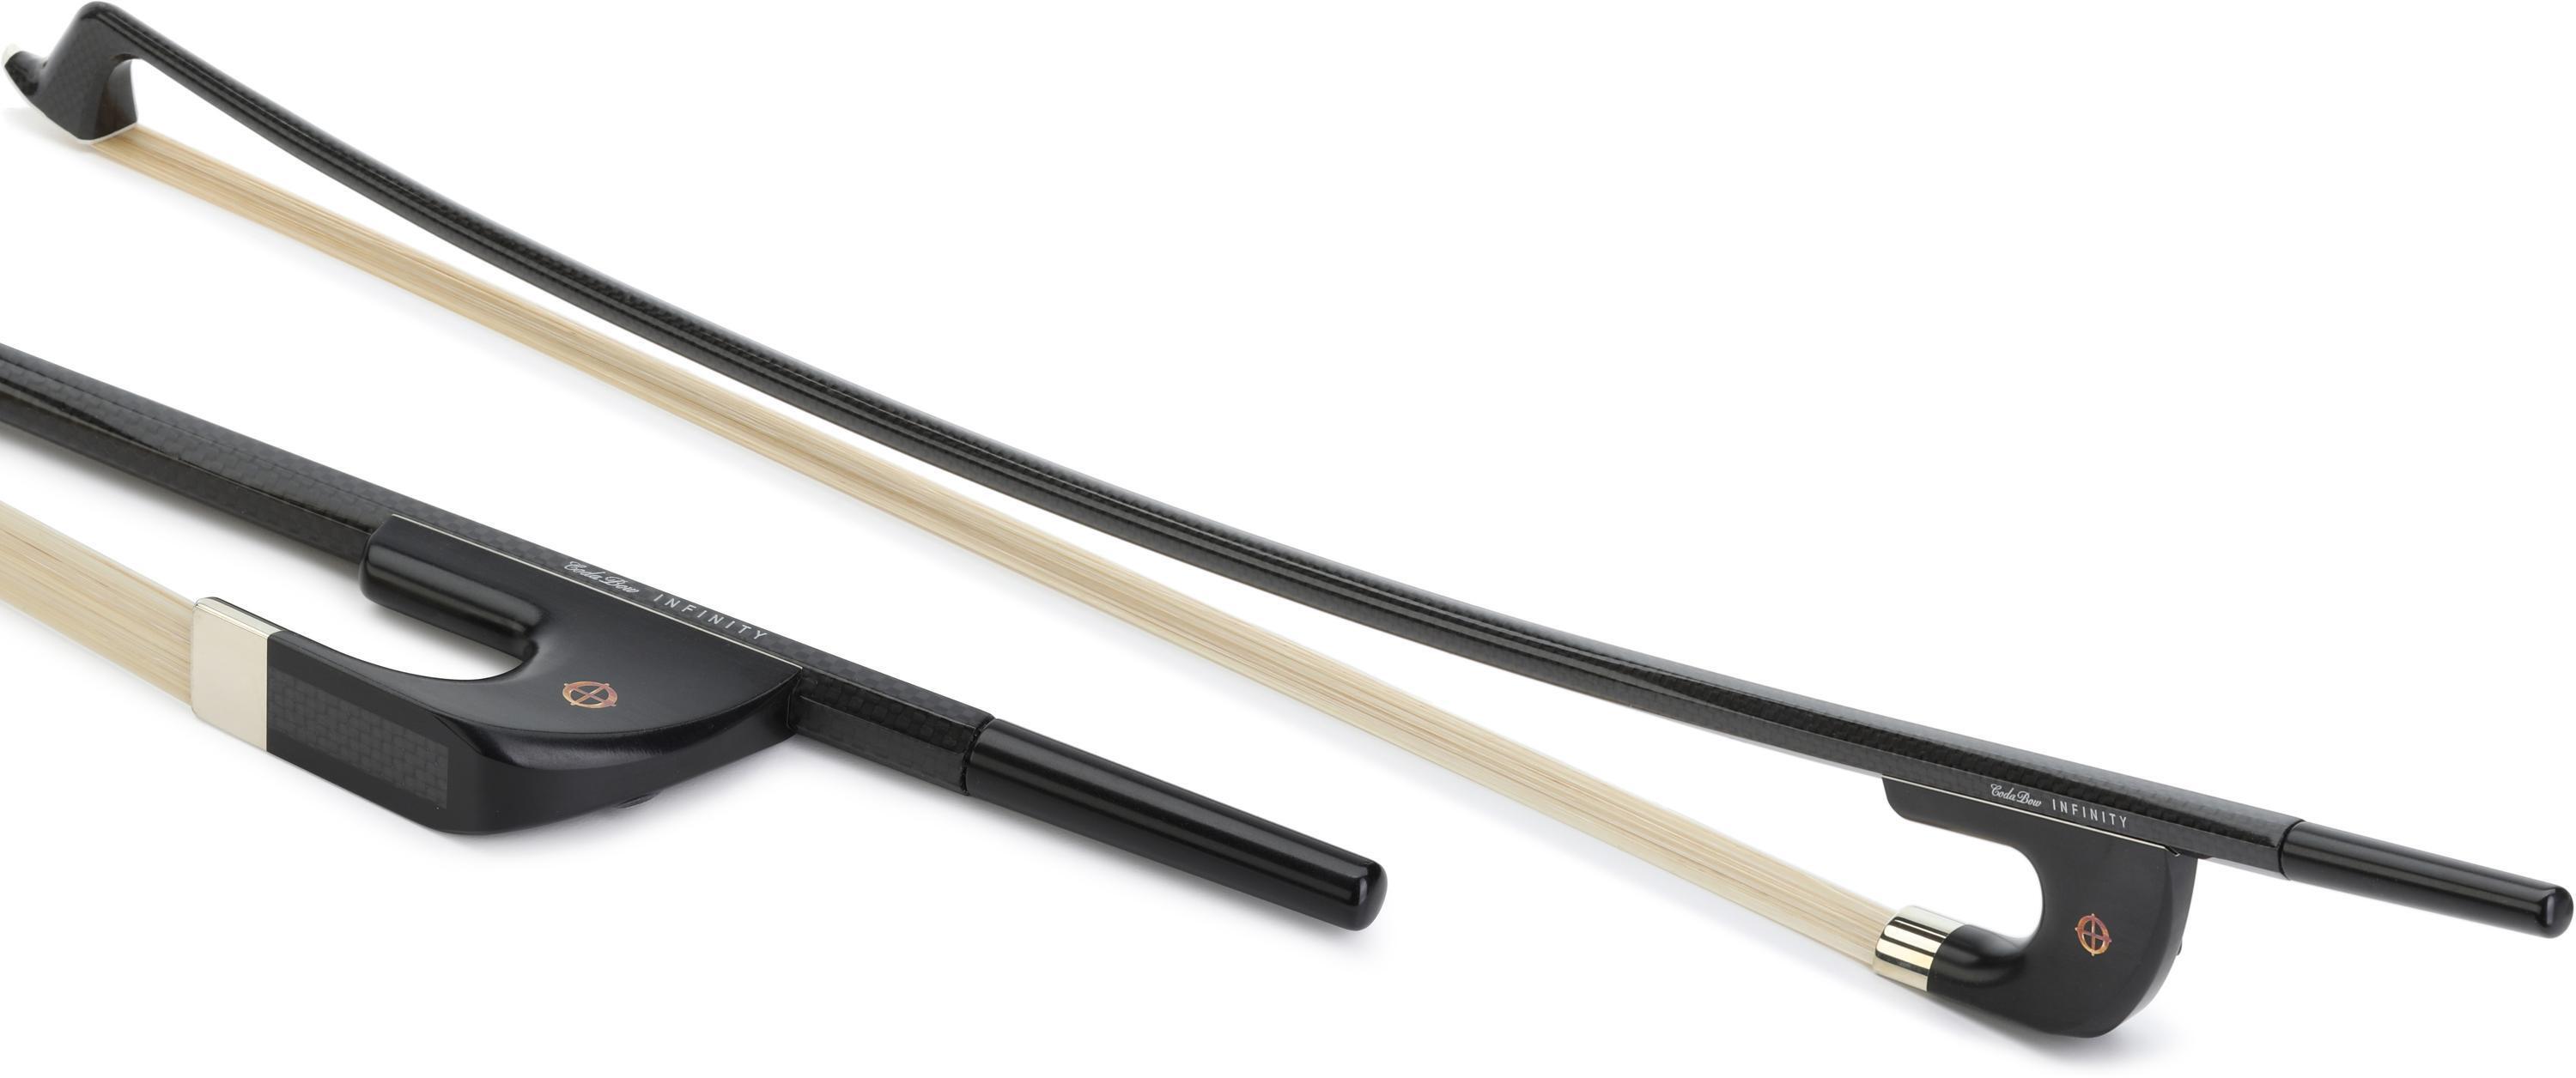 CodaBow Infinity Professional German Double Bass Bow - 3/4 Size